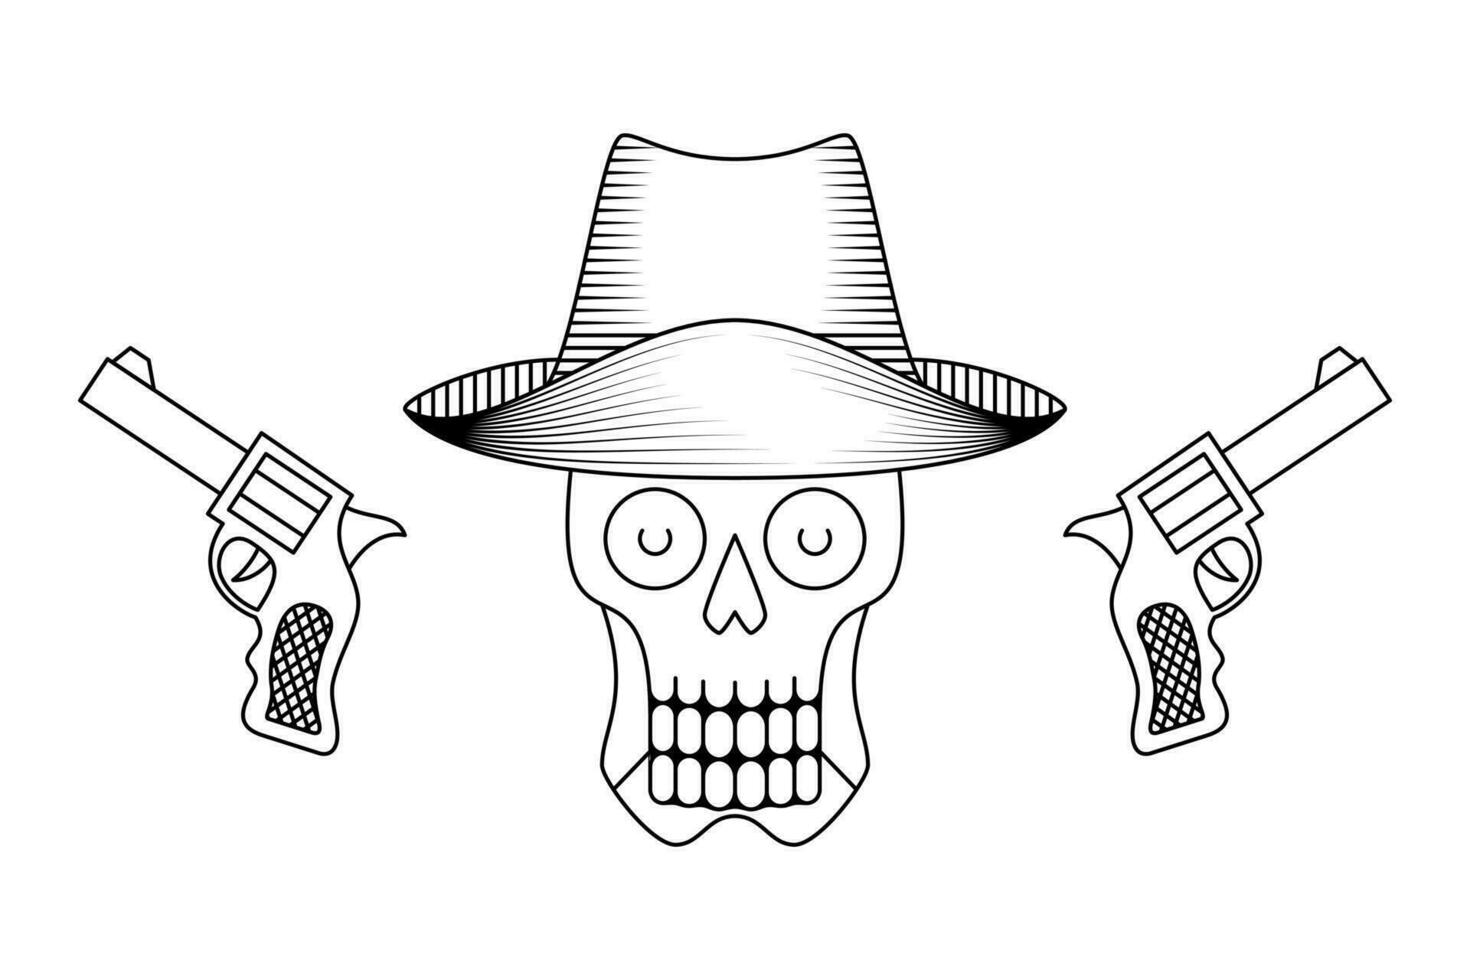 illustration of a cowboy skull wearing a hat with pistols. line, silhouette, sketch and simple style. used for clothing, print, logo, icon, symbol, sign. editable stroke vector